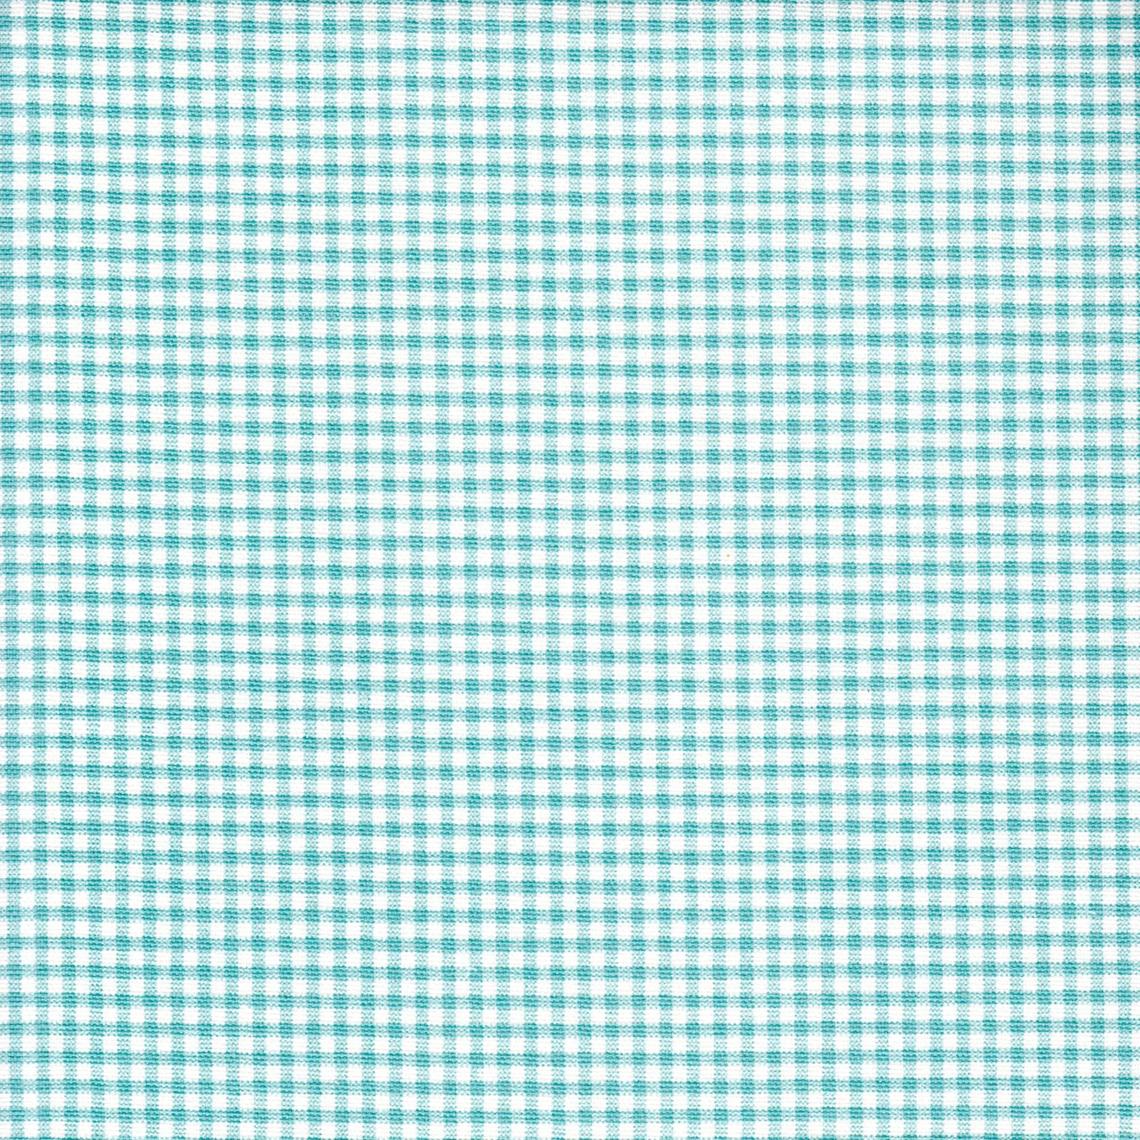 tie-up valance in farmhouse turquoise blue gingham check on cream